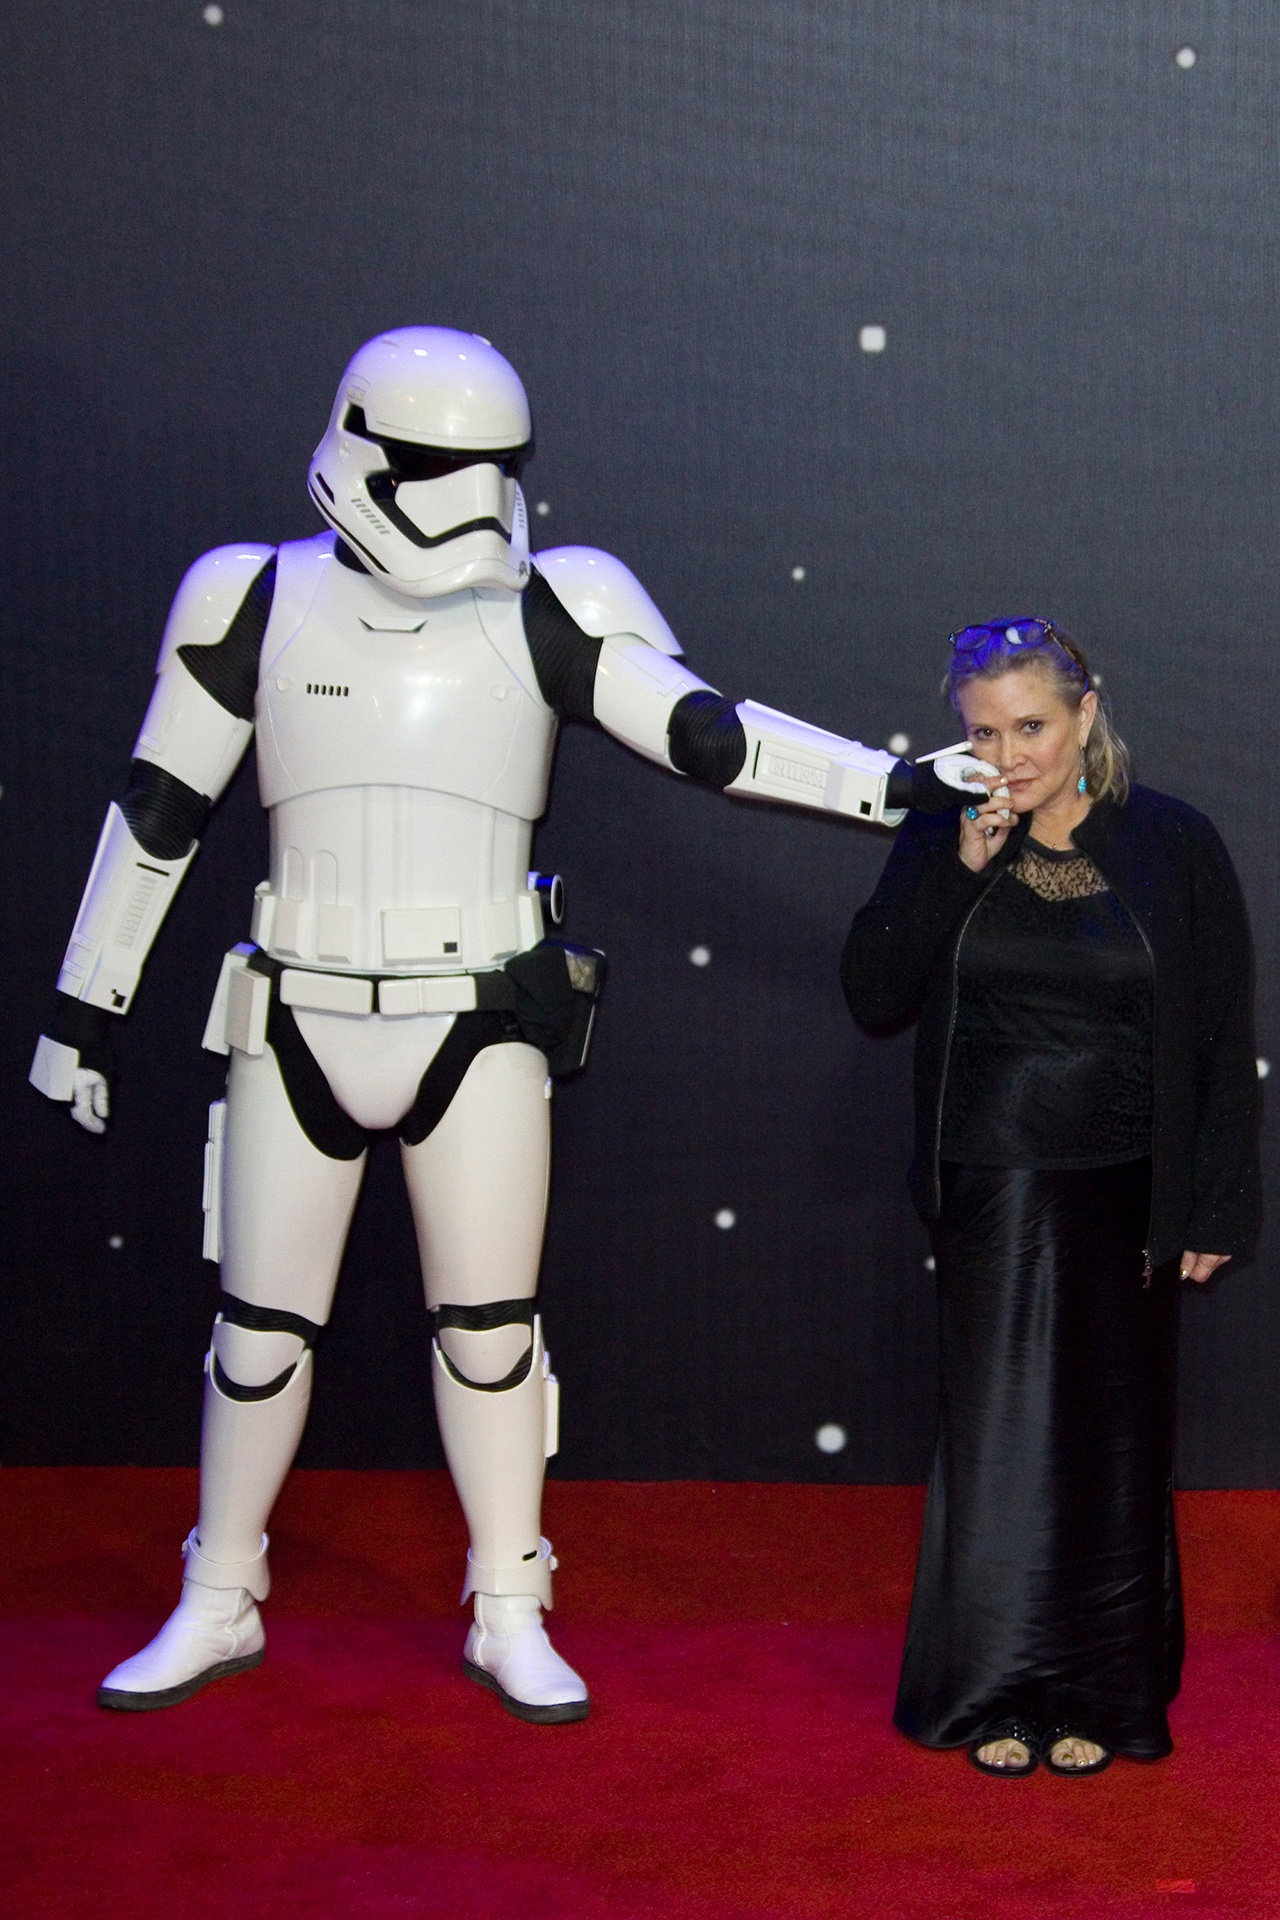 Carrie Fisher attends the “Star Wars: The Force Awakens” European Premiere held on Dec. 16, 2015 in London. (Bakounine/Abaca Press)